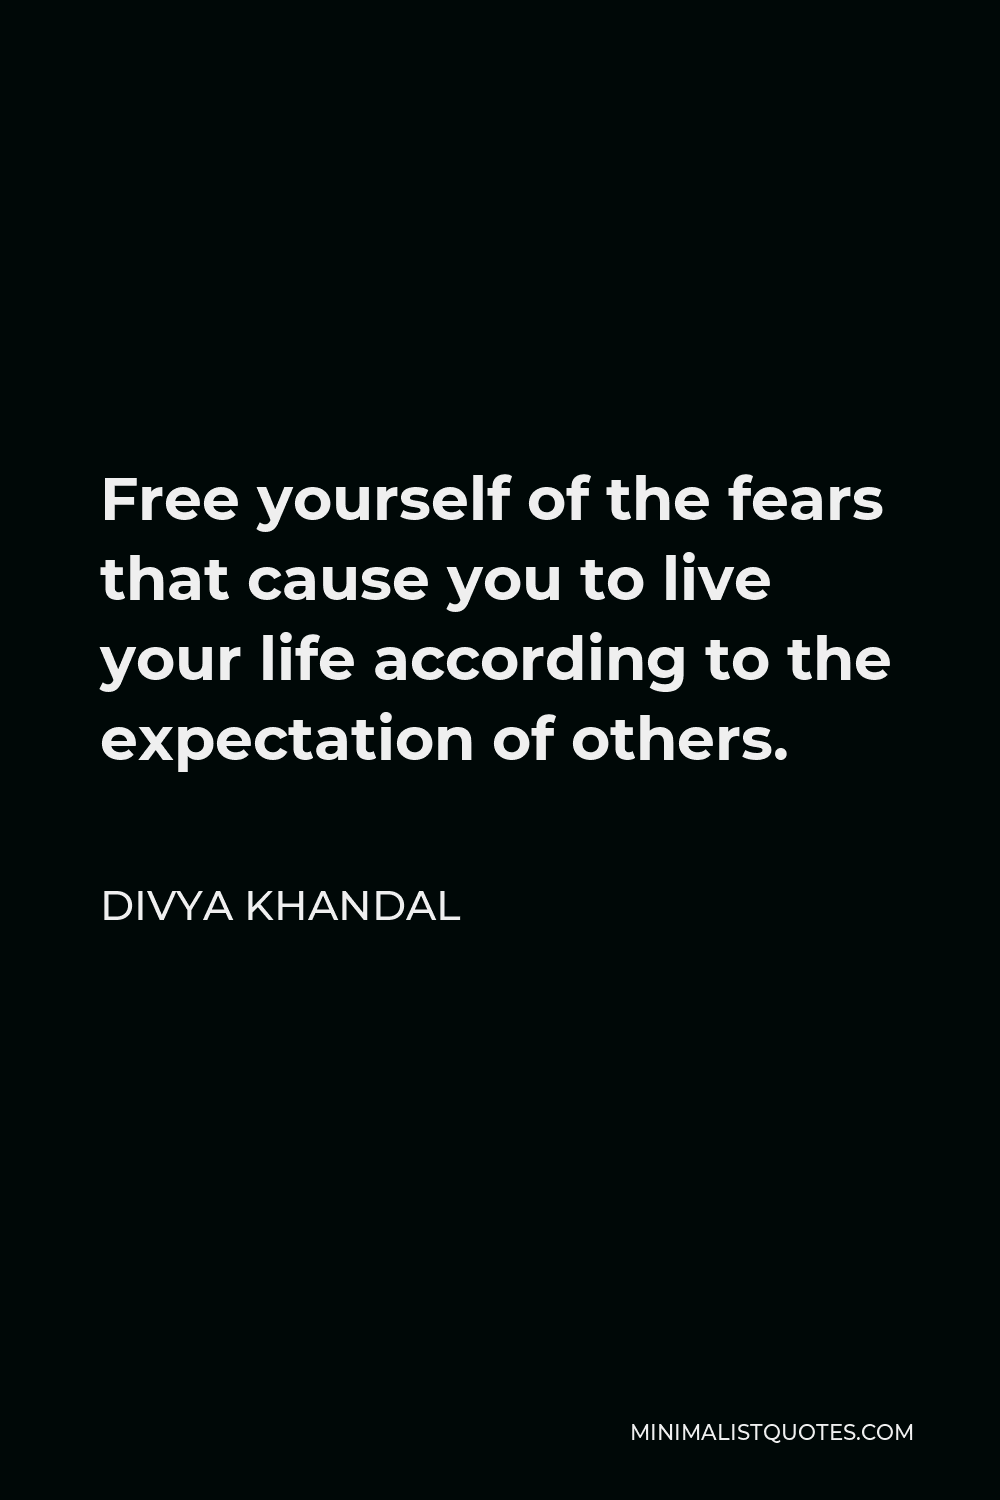 Divya khandal Quote - Free yourself of the fears that cause you to live your life according to the expectation of others.